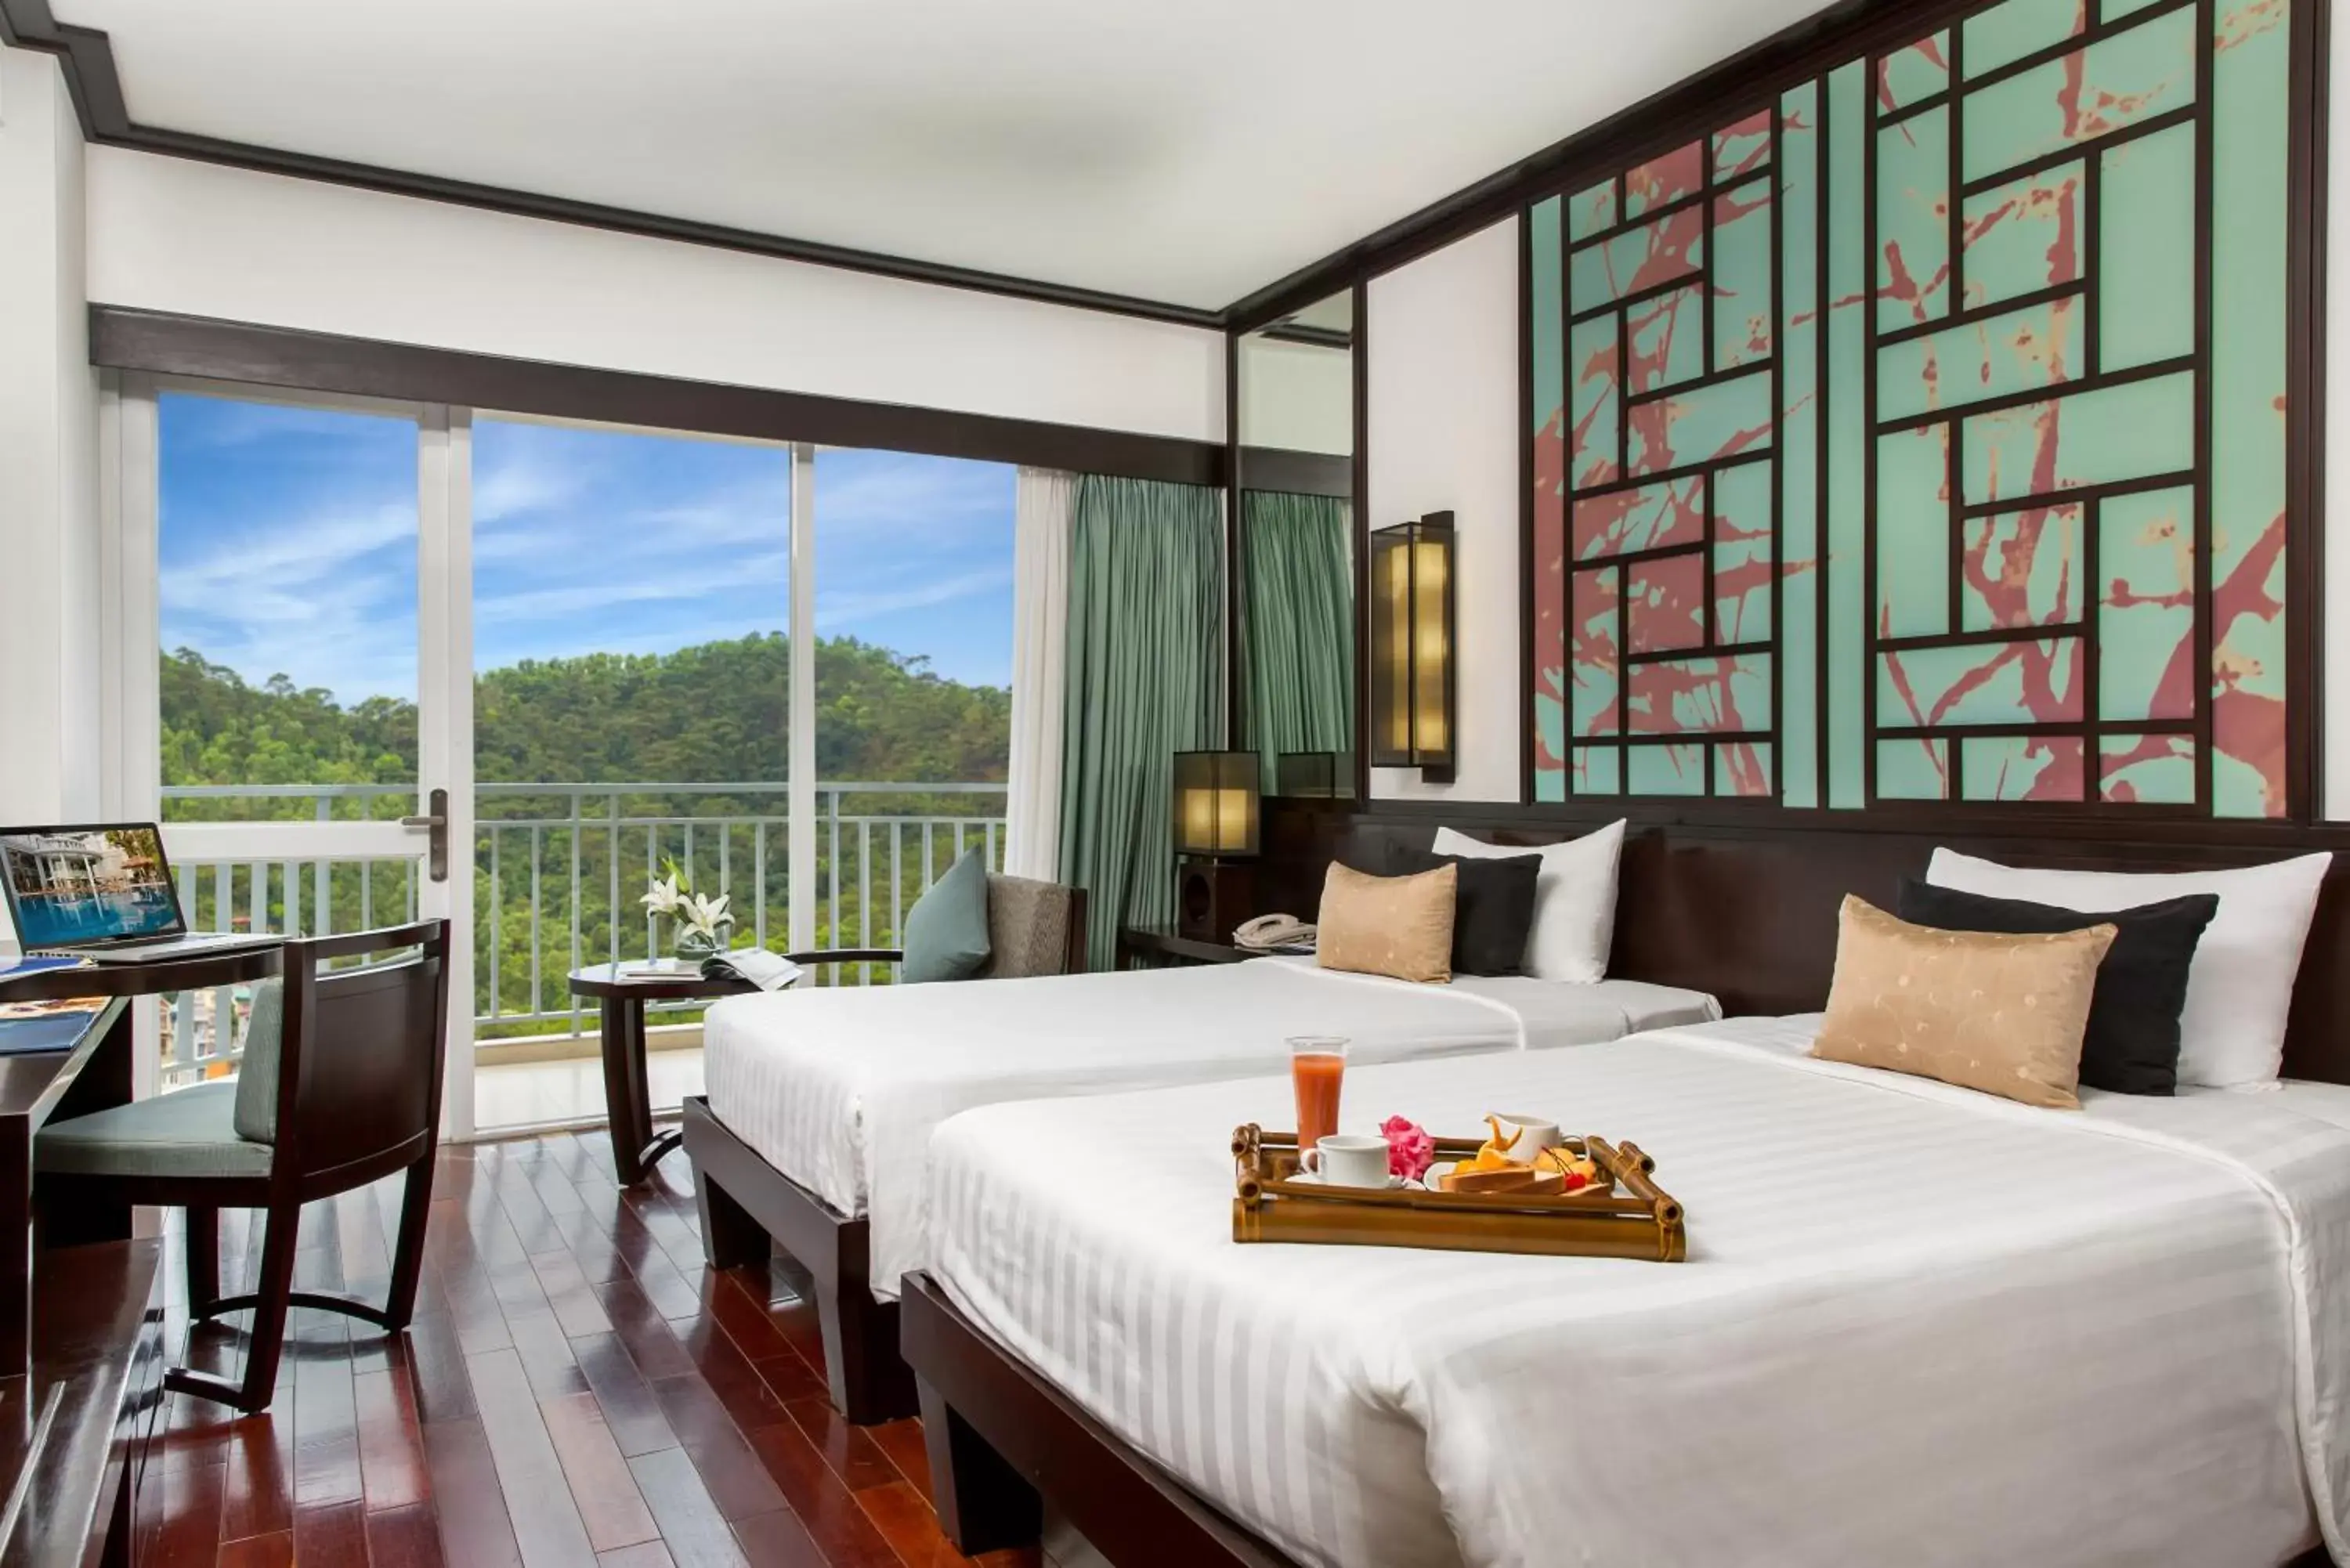 Standard Room with 2 Single Size beds in Novotel Ha Long Bay Hotel